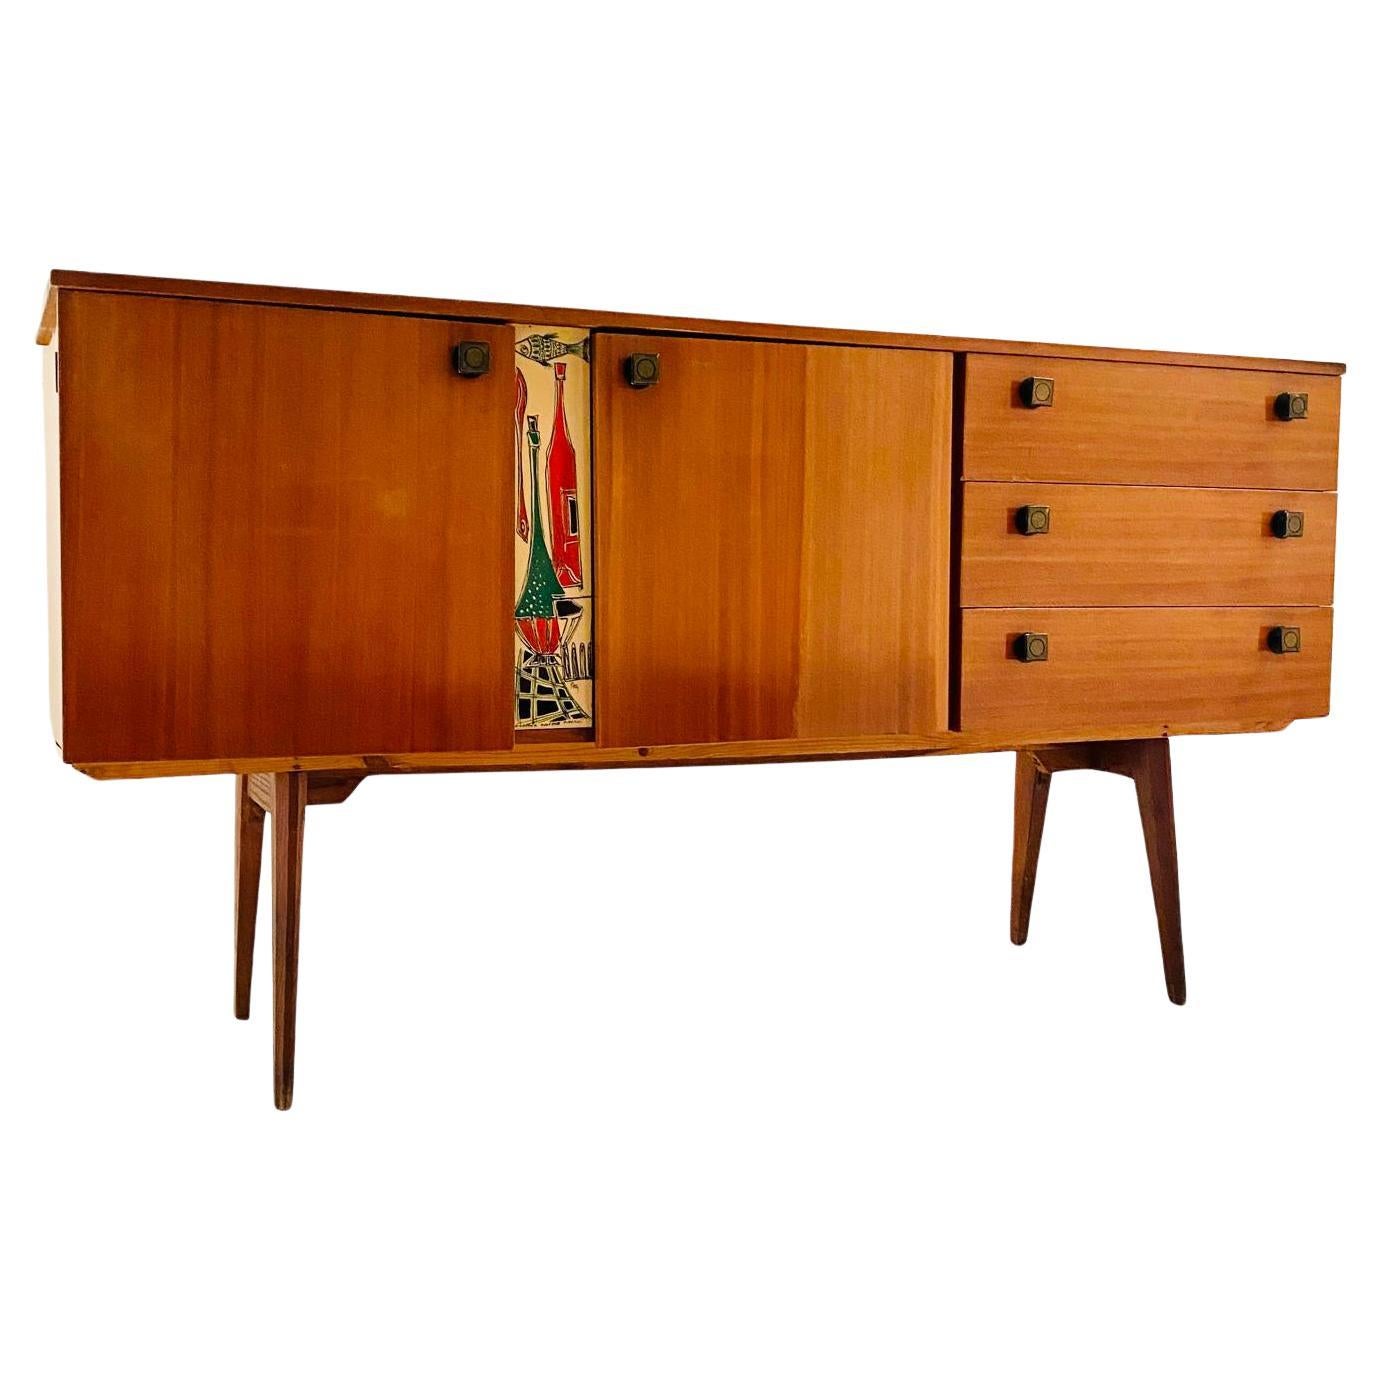 A 1950's vintage sideboard with lacquered finishing and beautiful ethnical drawing in pure Mid-Century Modern style. 

The sideboard is made by three drawers on one side and a two shutter opening case on the other one. The opening handles are made